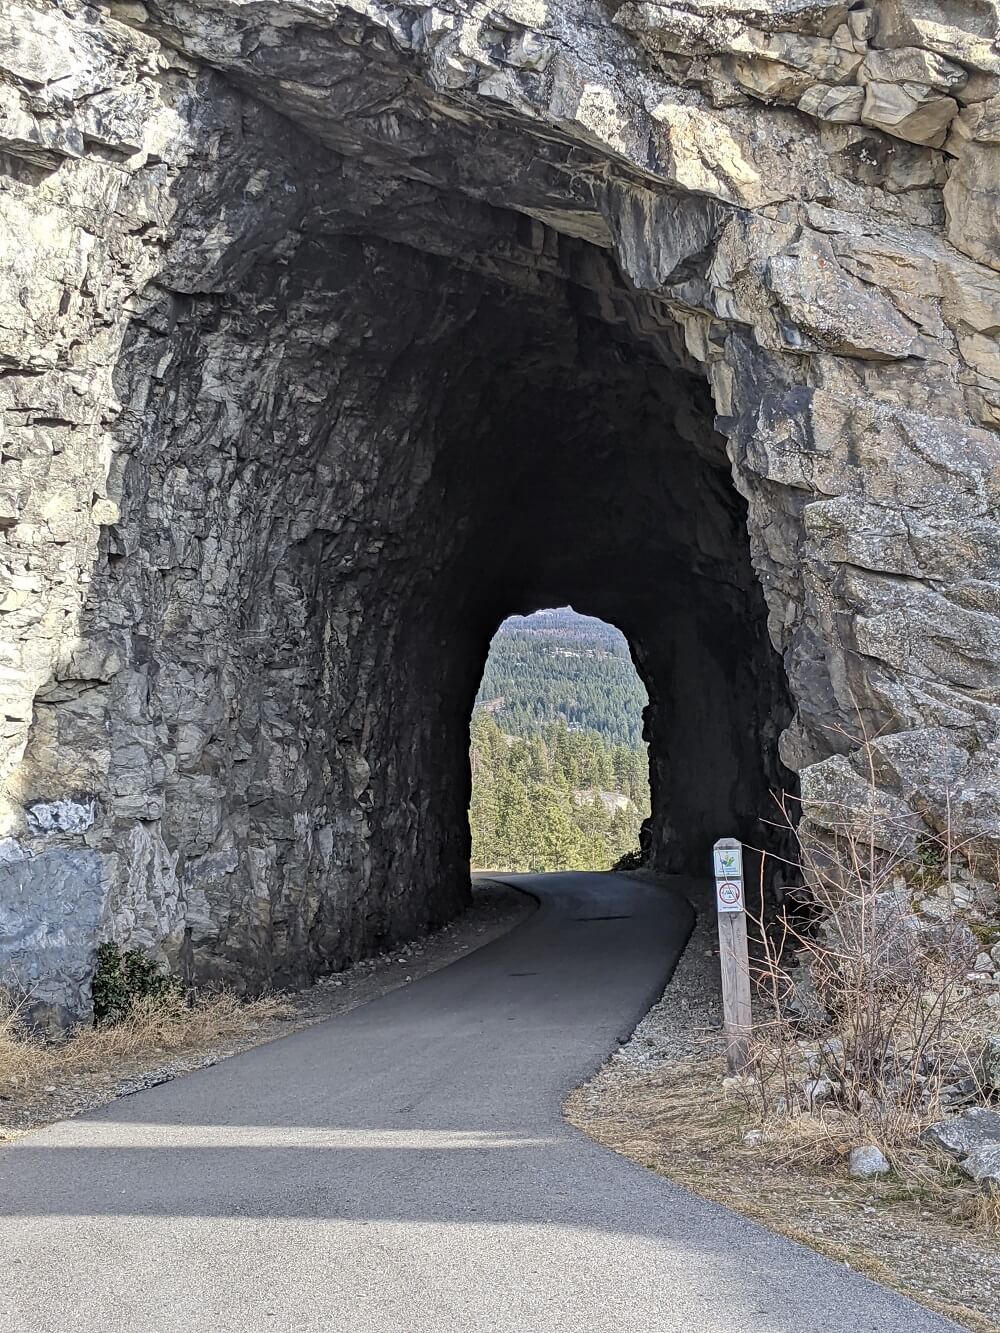 Looking through rocky blasted tunnel in Naramata, with paved path leading through centre